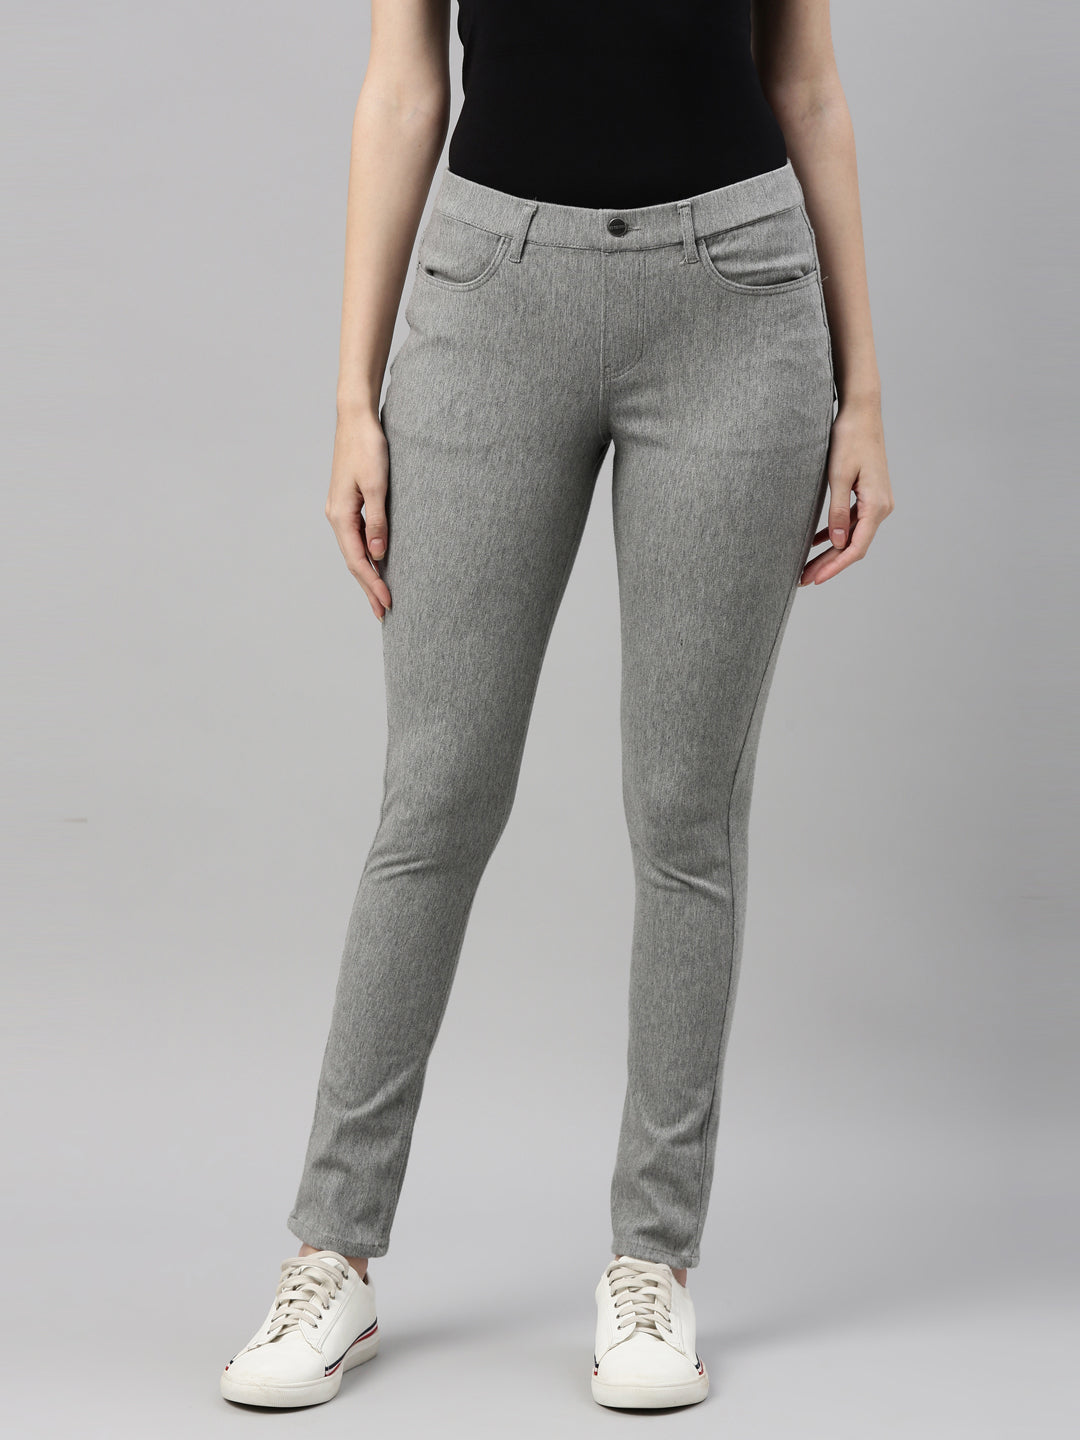 Go Colors Women Grey Solid Super Stretch Jeggings